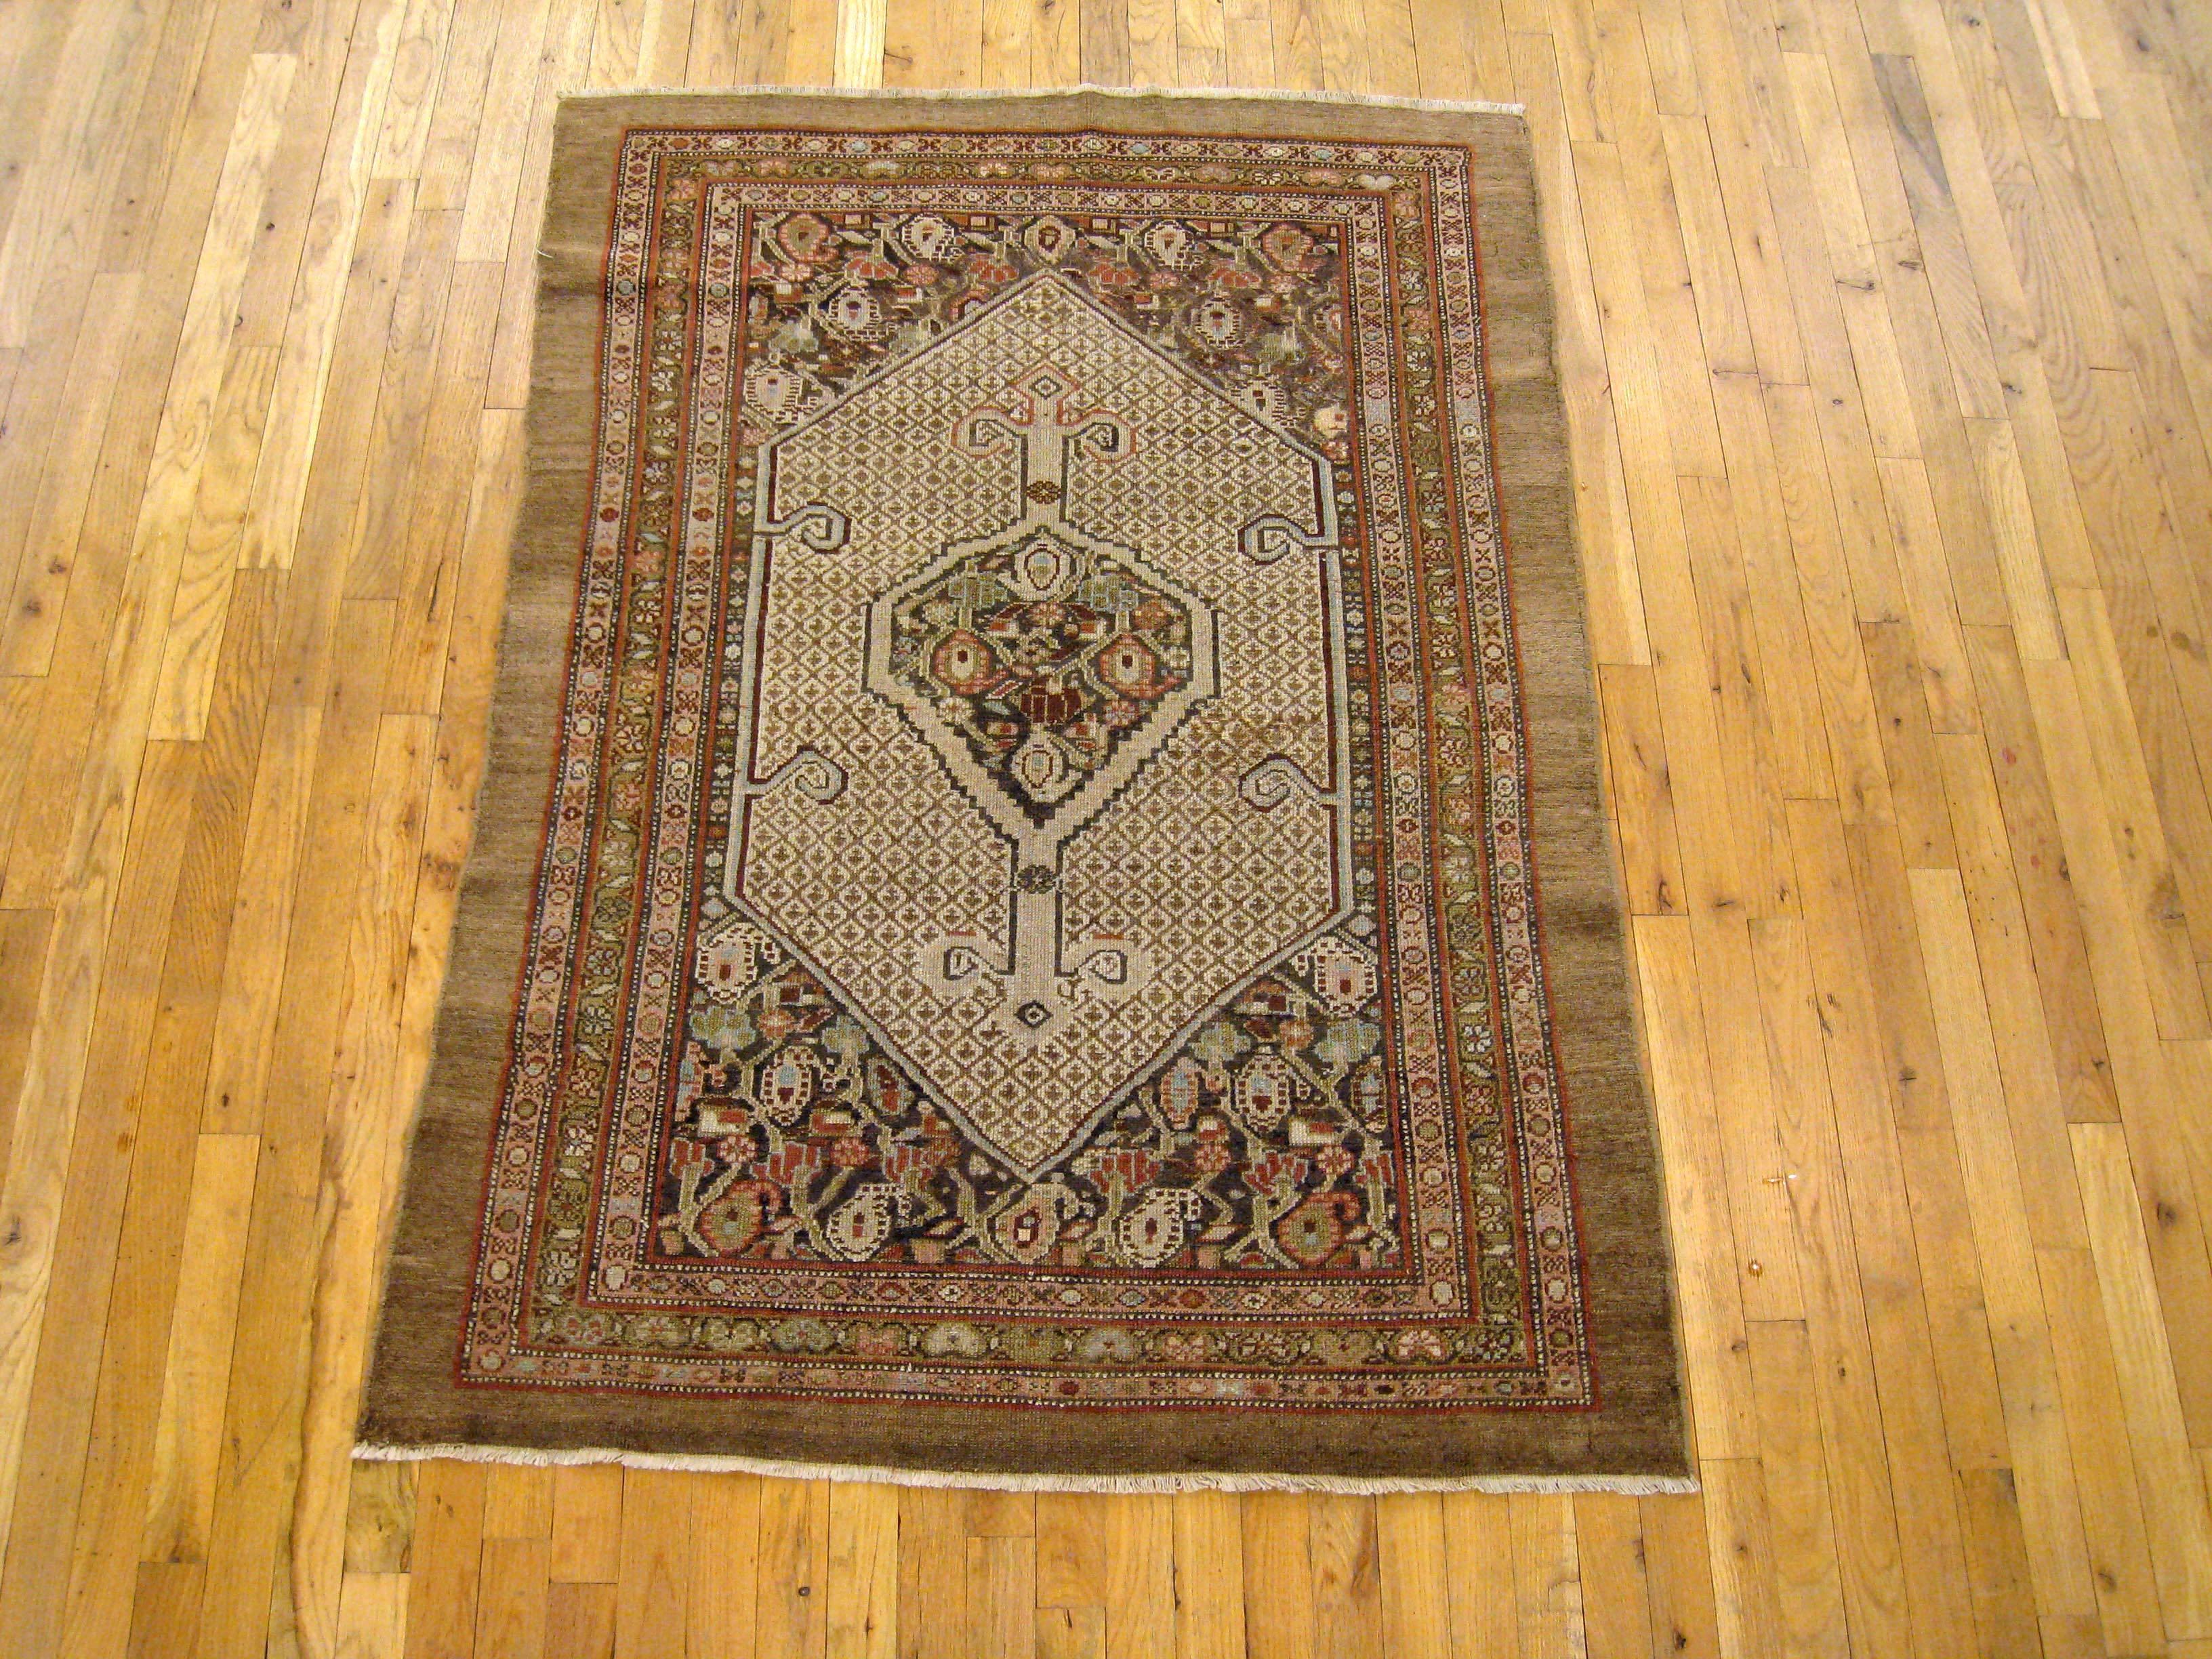 An antique Persian Hamadan camel hair oriental rug, circa 1910, size 5'2 x 3'9. This delightful small carpet features a central cartouche with a gul medallion, embedded within a field of small diamond elements, and complemented by end designs of